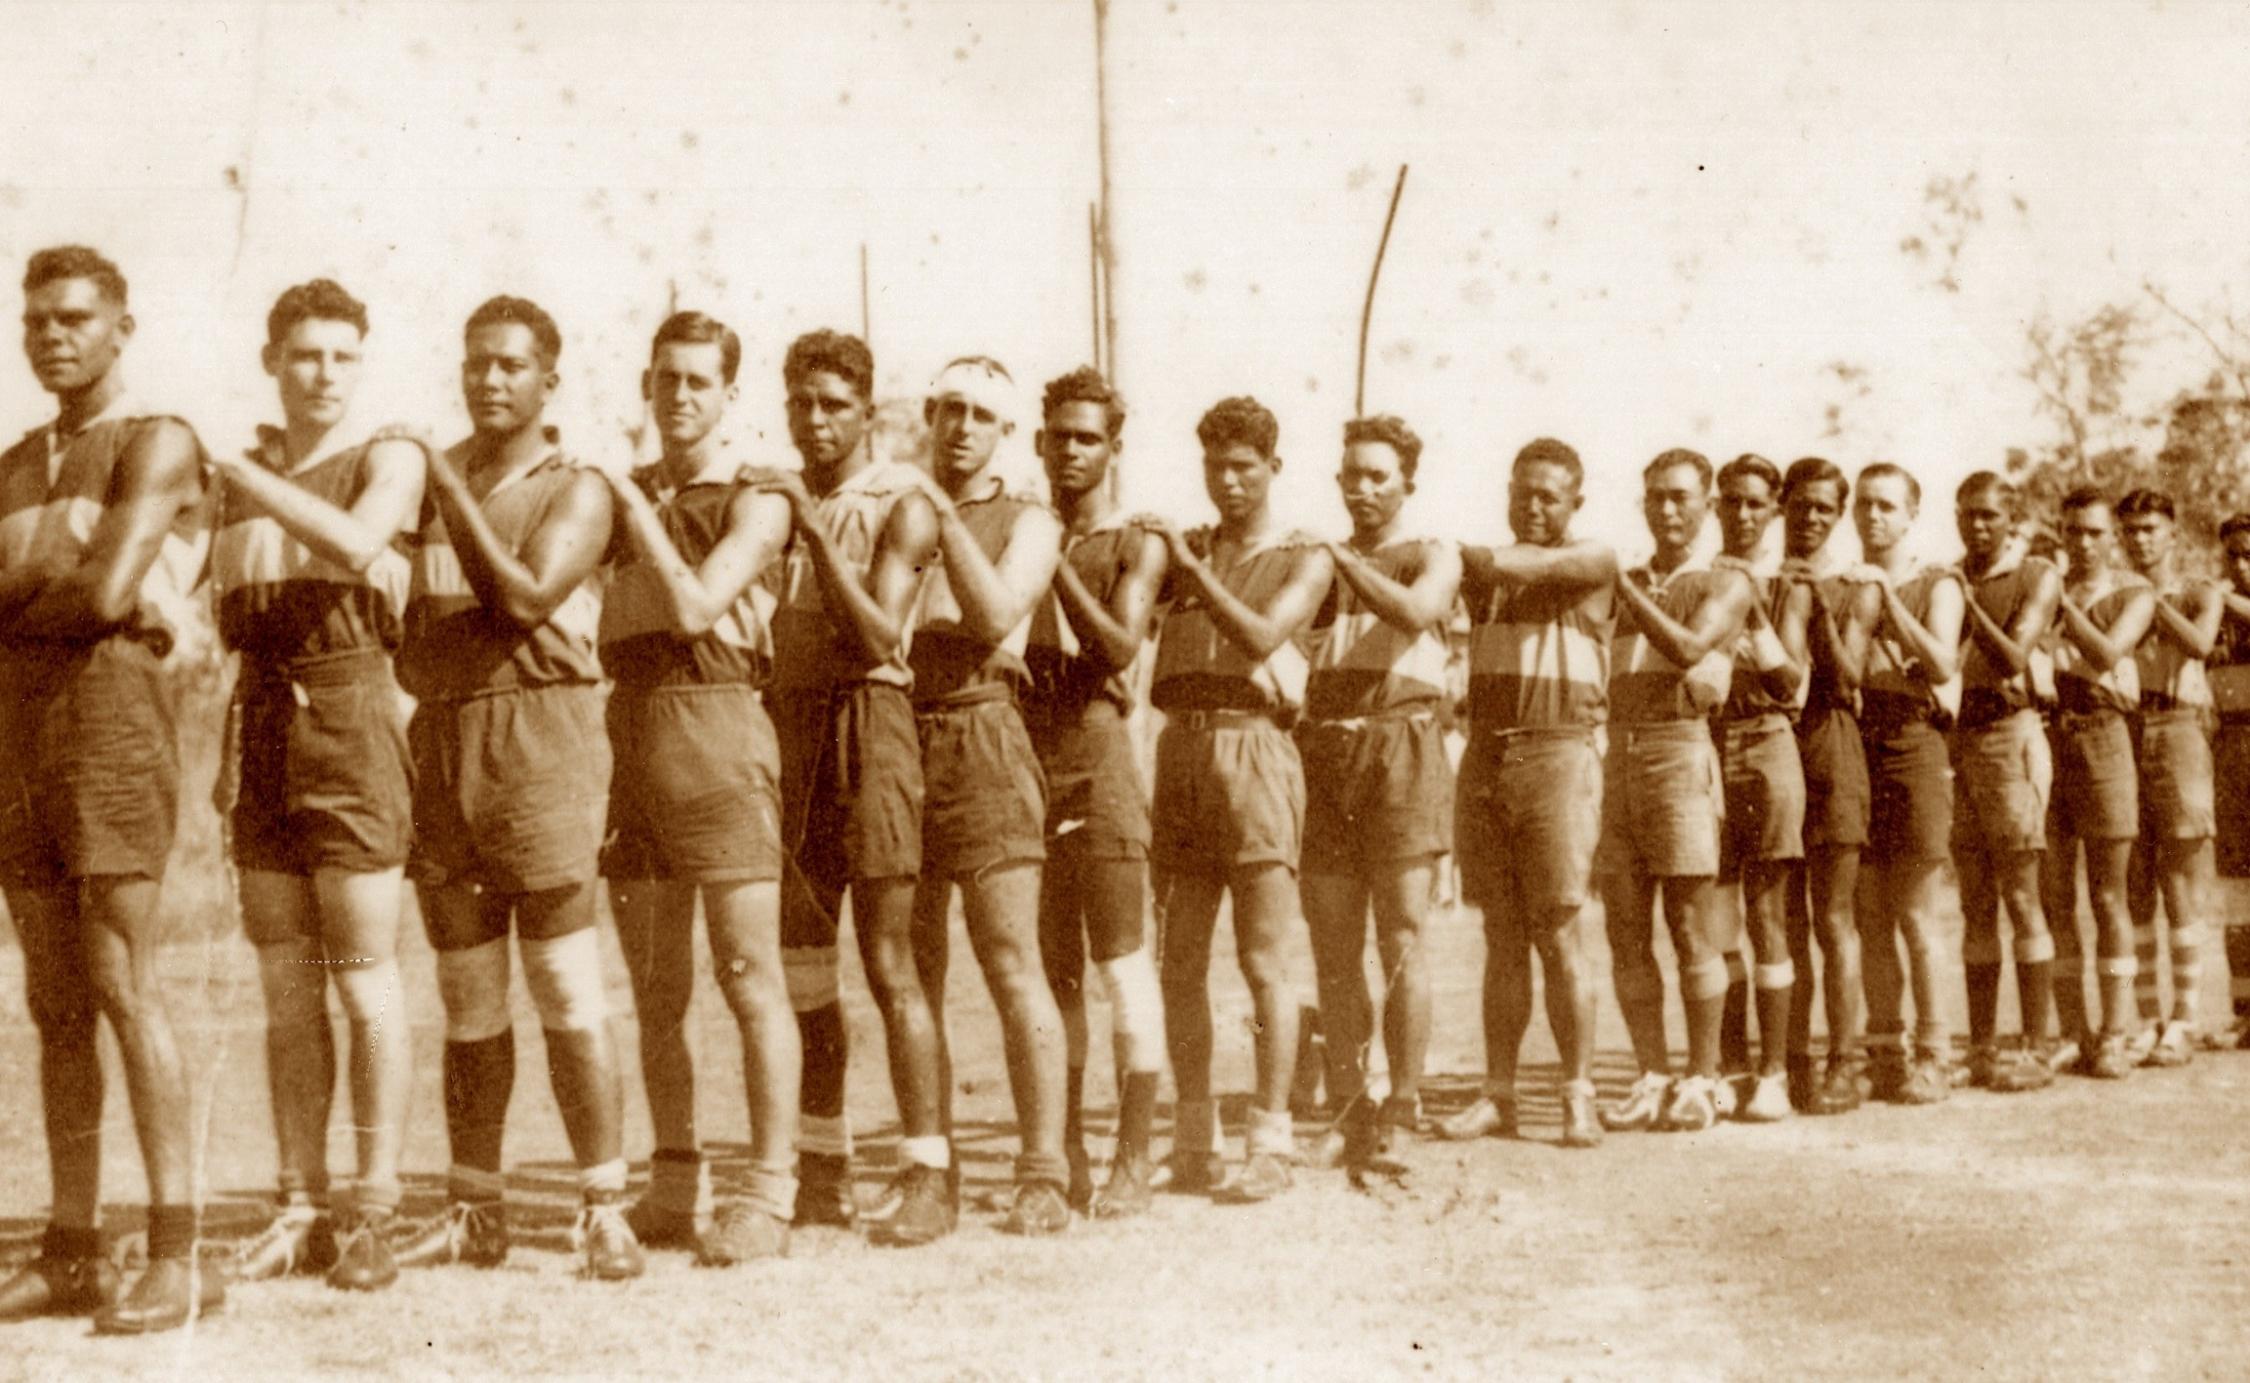 Sepia coloured photograph of the Buffalo football team lined up at an angle with their hands resting on the shoulders of the person in front of them